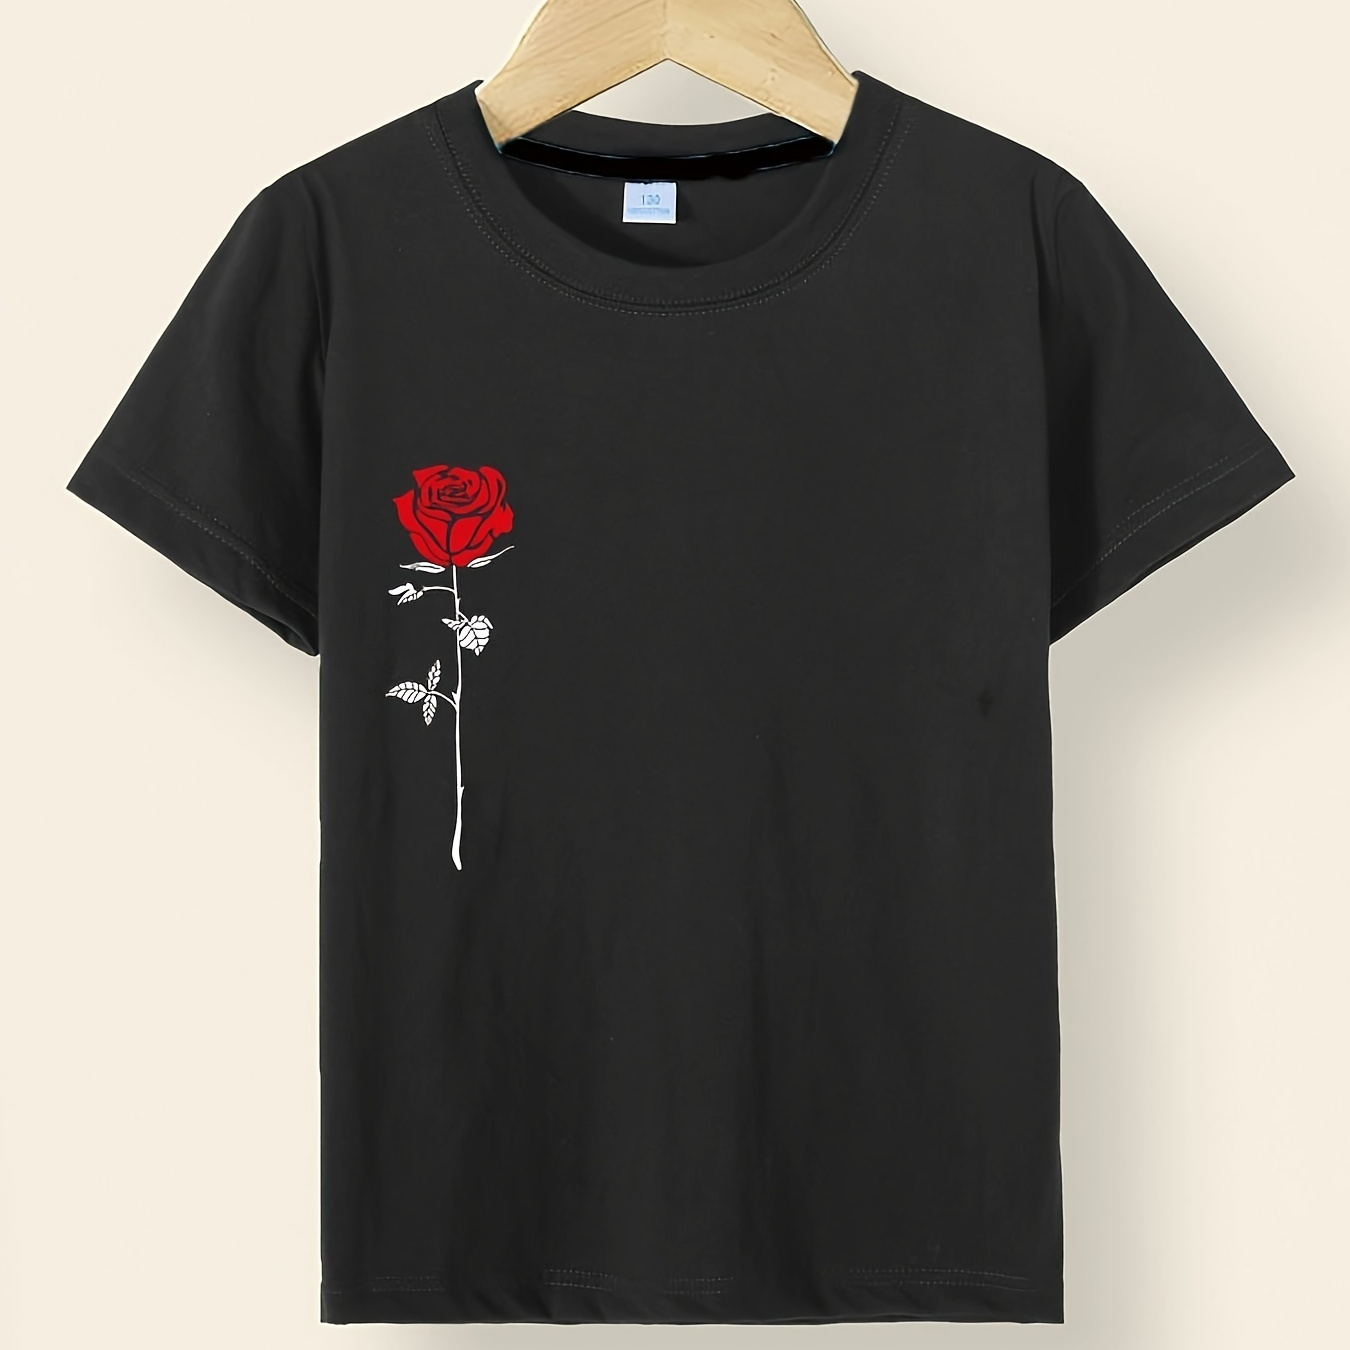 

Fashion Rose Print Boys Creative T-shirt, Casual Lightweight Comfy Short Sleeve Crew Neck Tee Tops, Kids Clothings For Summer